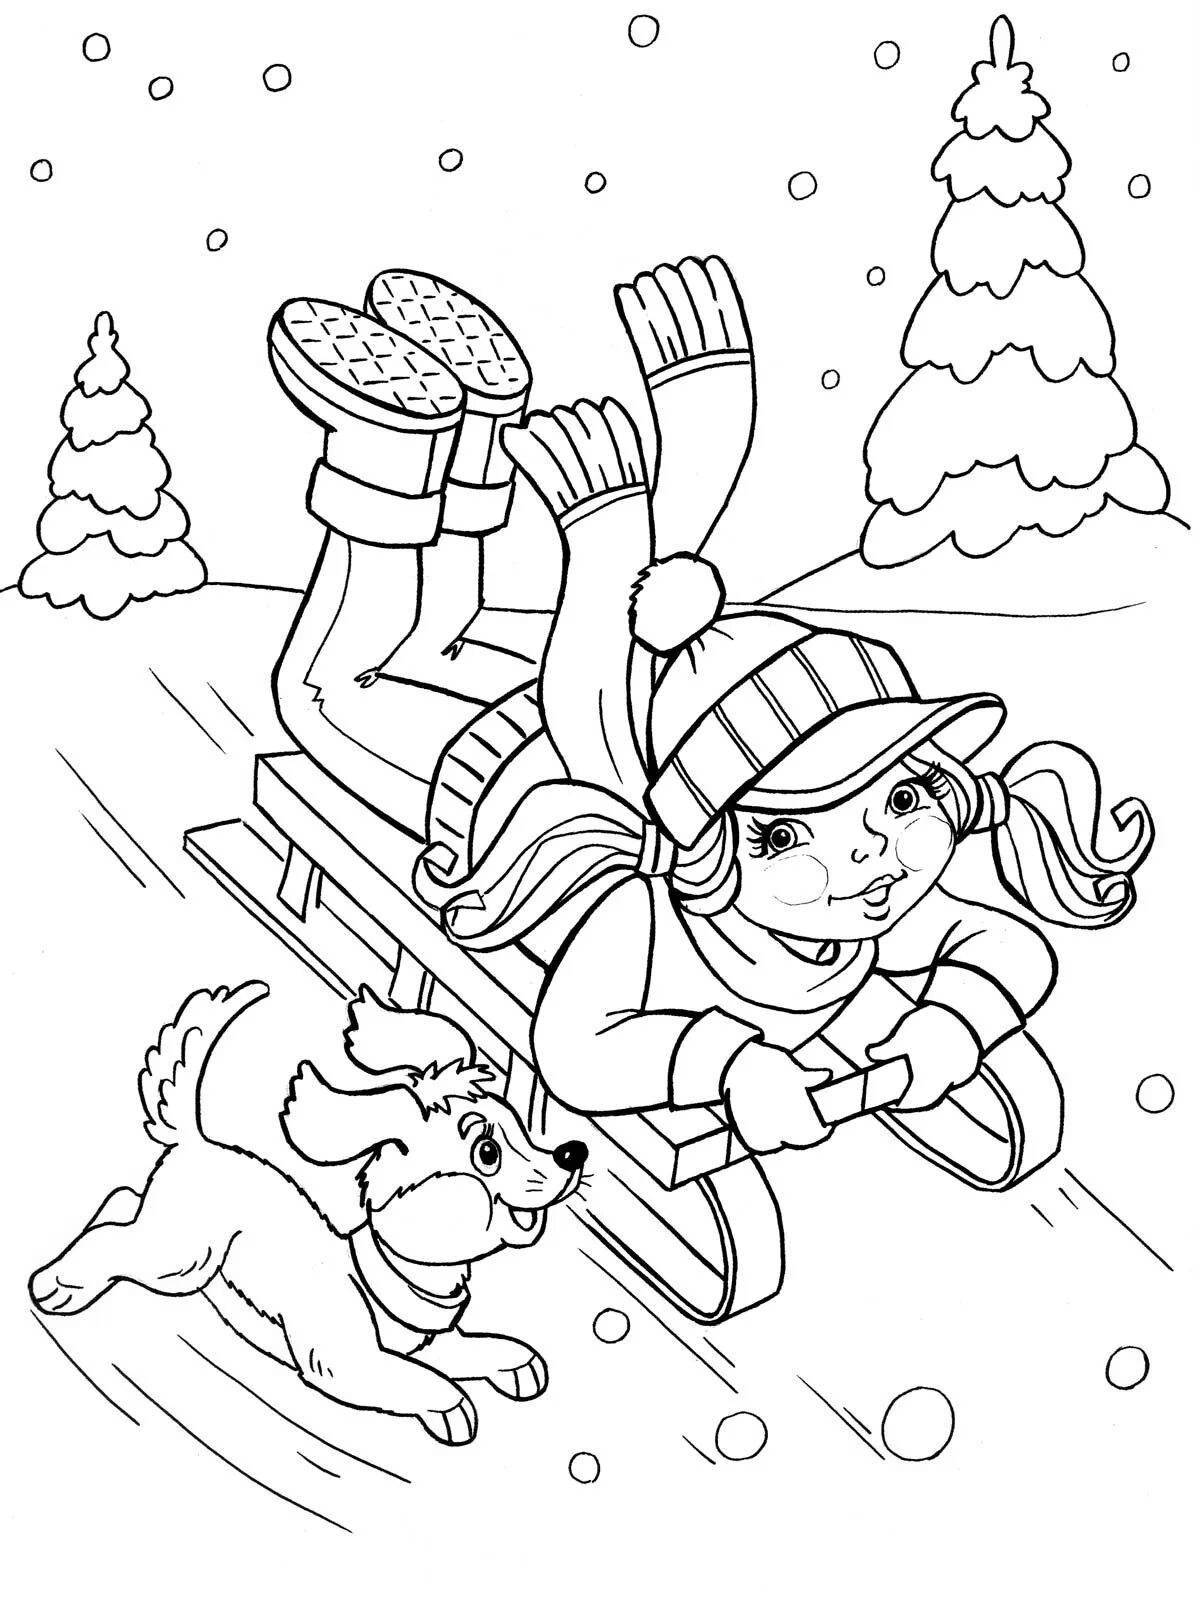 Colorful Christmas holidays coloring book